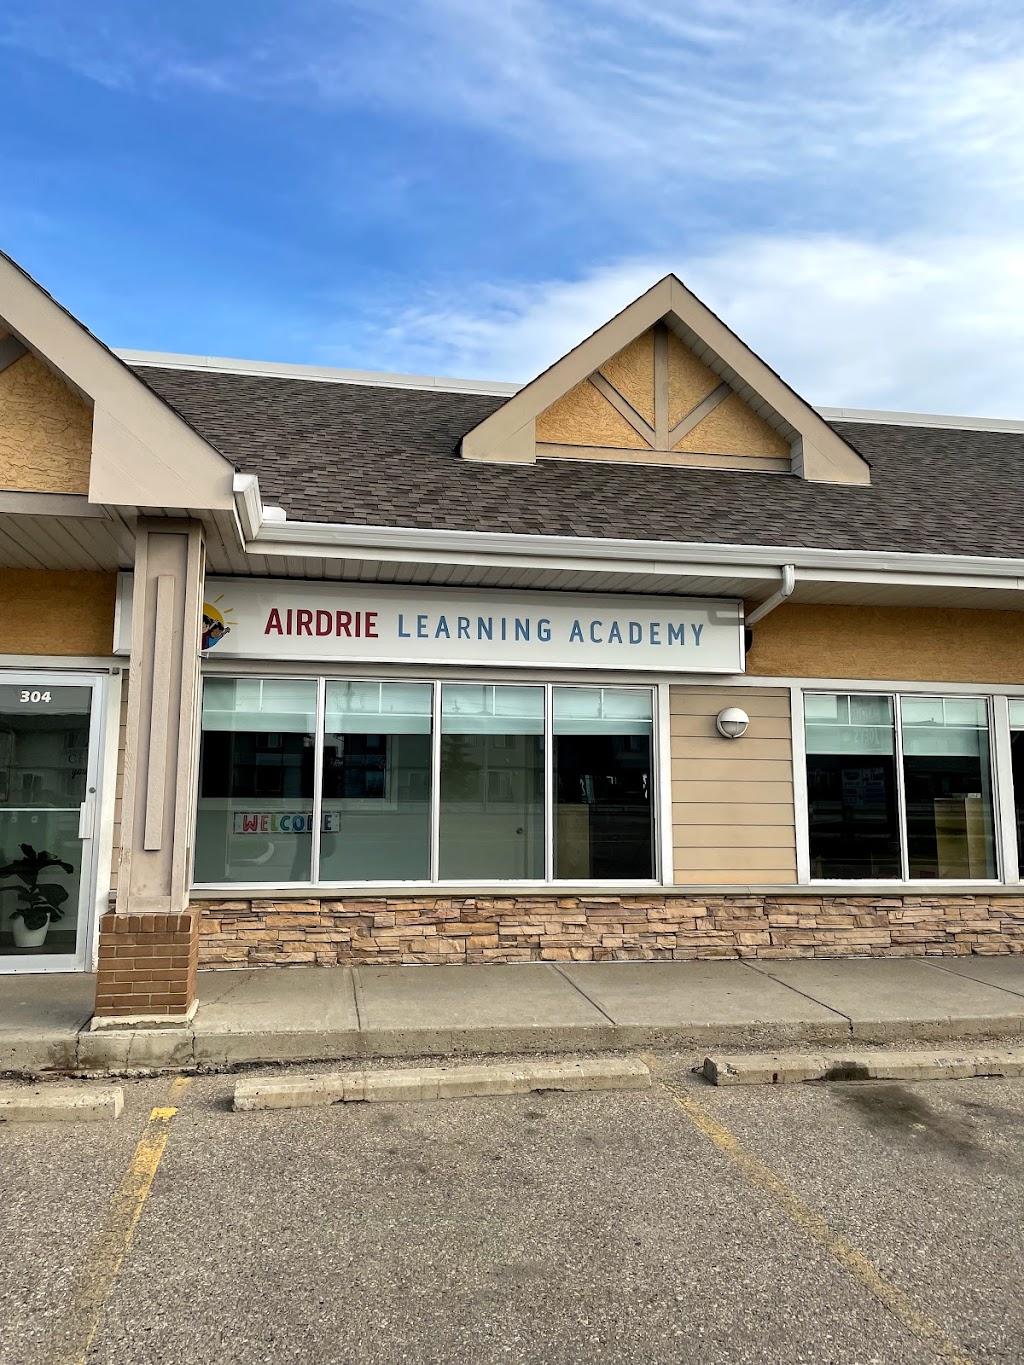 Airdrie Learning Academy | school | 800 Veterans Blvd NW #304, Airdrie, AB T4A 2G1, Canada | 8257331268 OR +1 825-733-1268